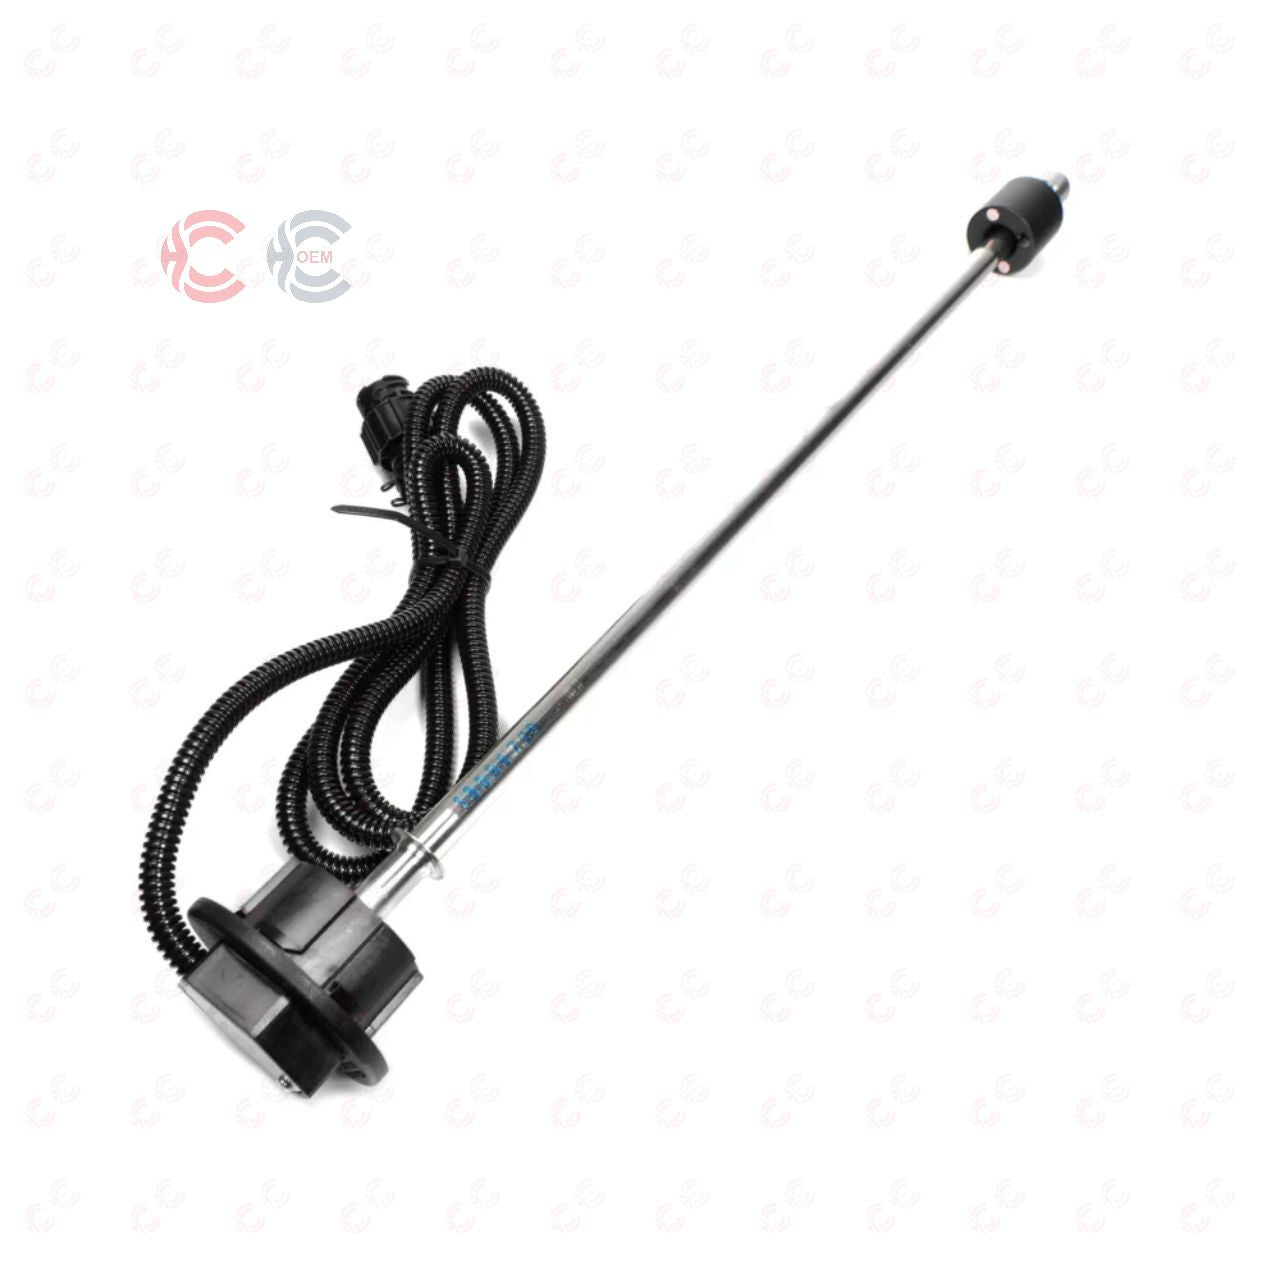 OEM: A0145428717Material: ABS metalColor: Black GoldenOrigin: Made in ChinaWeight: 1000gPacking List: 1* Fuel Level Sensor More ServiceWe can provide OEM Manufacturing serviceWe can Be your one-step solution for Auto PartsWe can provide technical scheme for you Feel Free to Contact Us, we will get back to you as soon as possible.